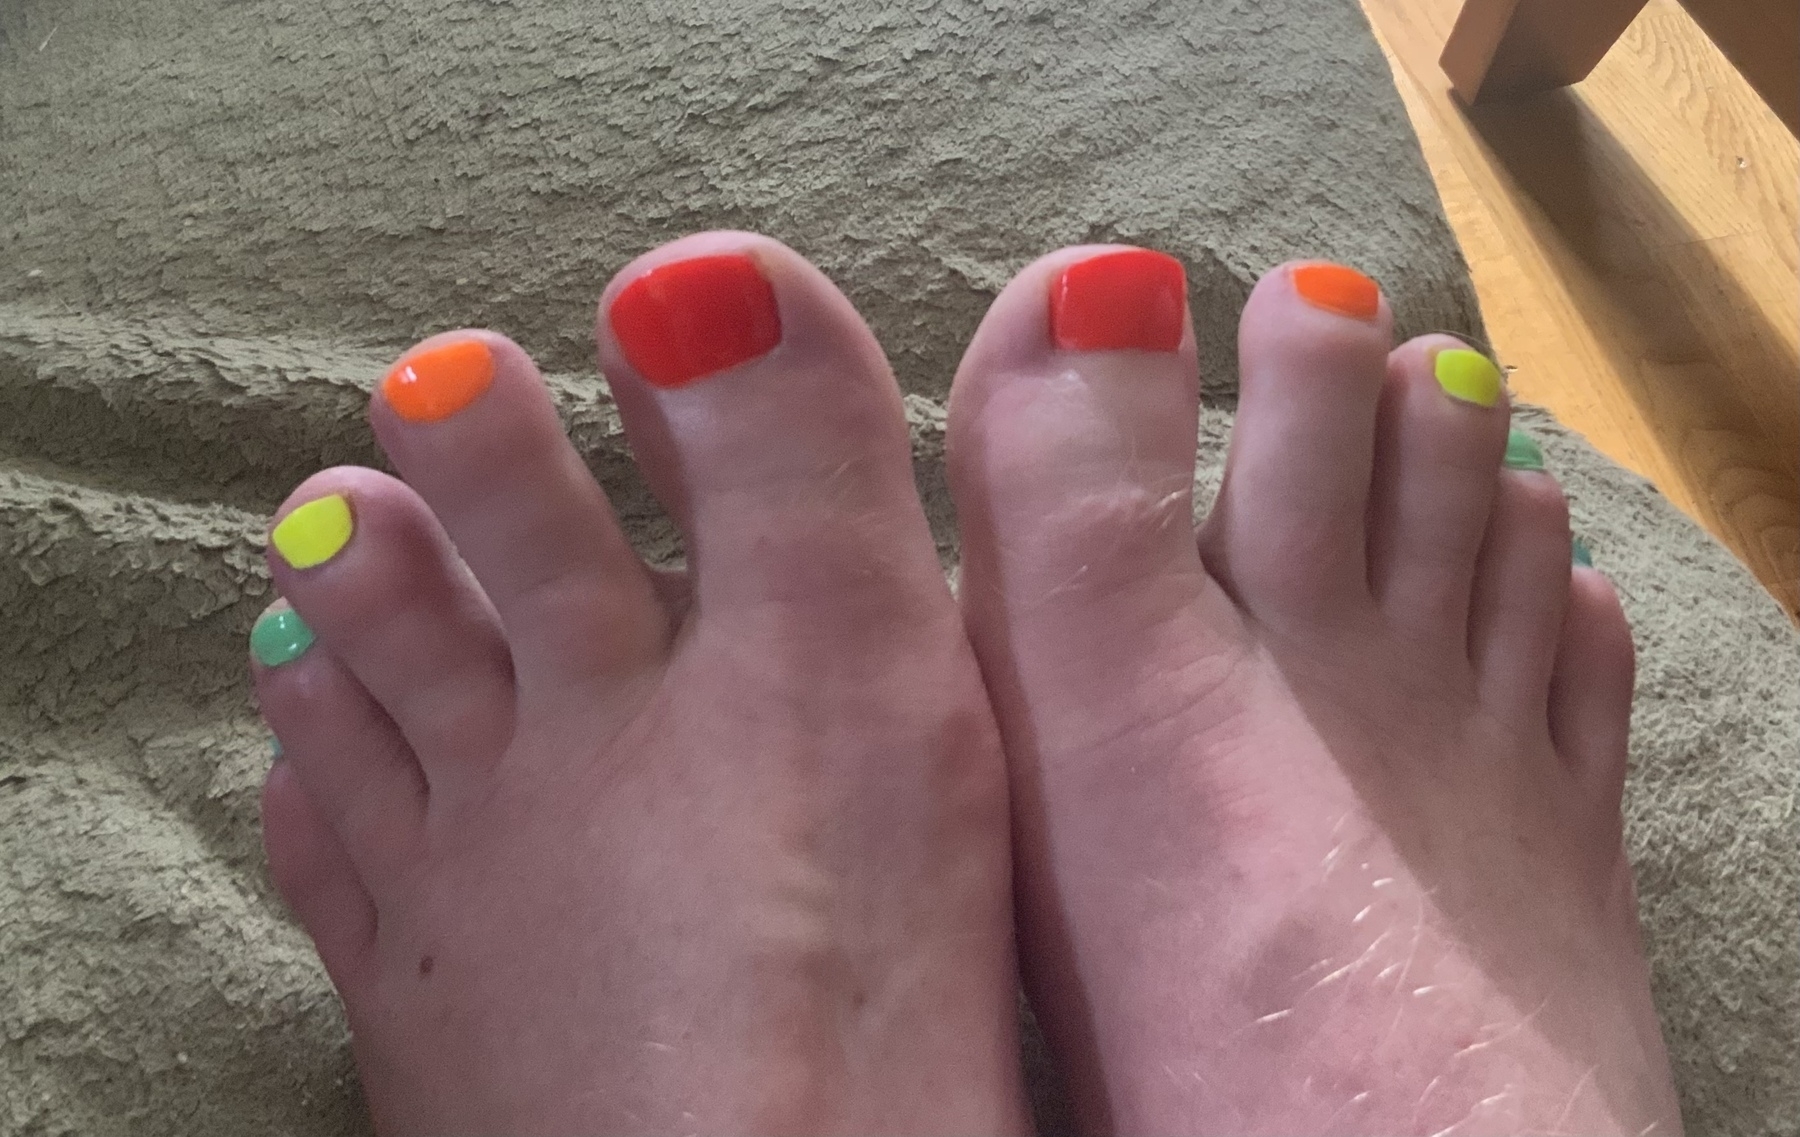 post-pedicure feet with nail polish of neon red, orange, yellow, green, and blue